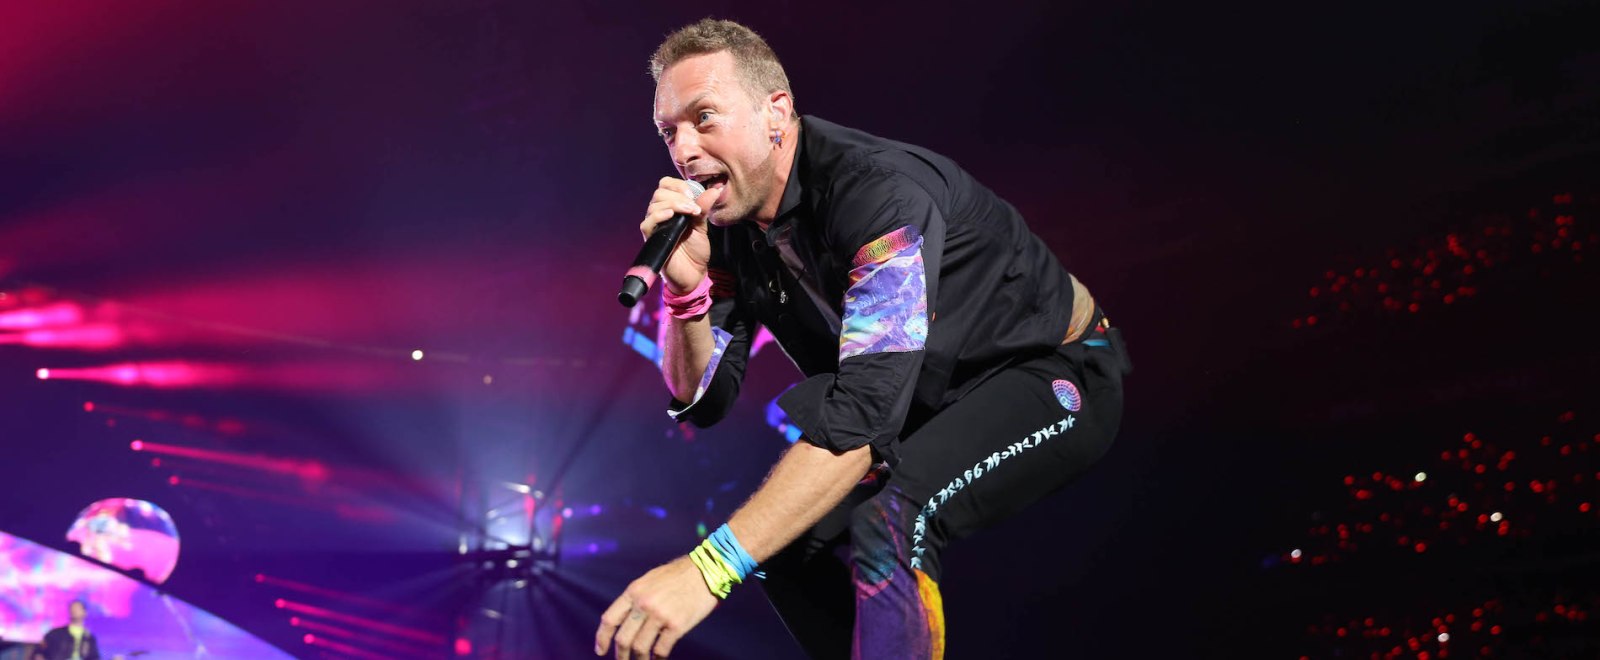 Chris Martin Coldplay Music of the Spheres tour 2022